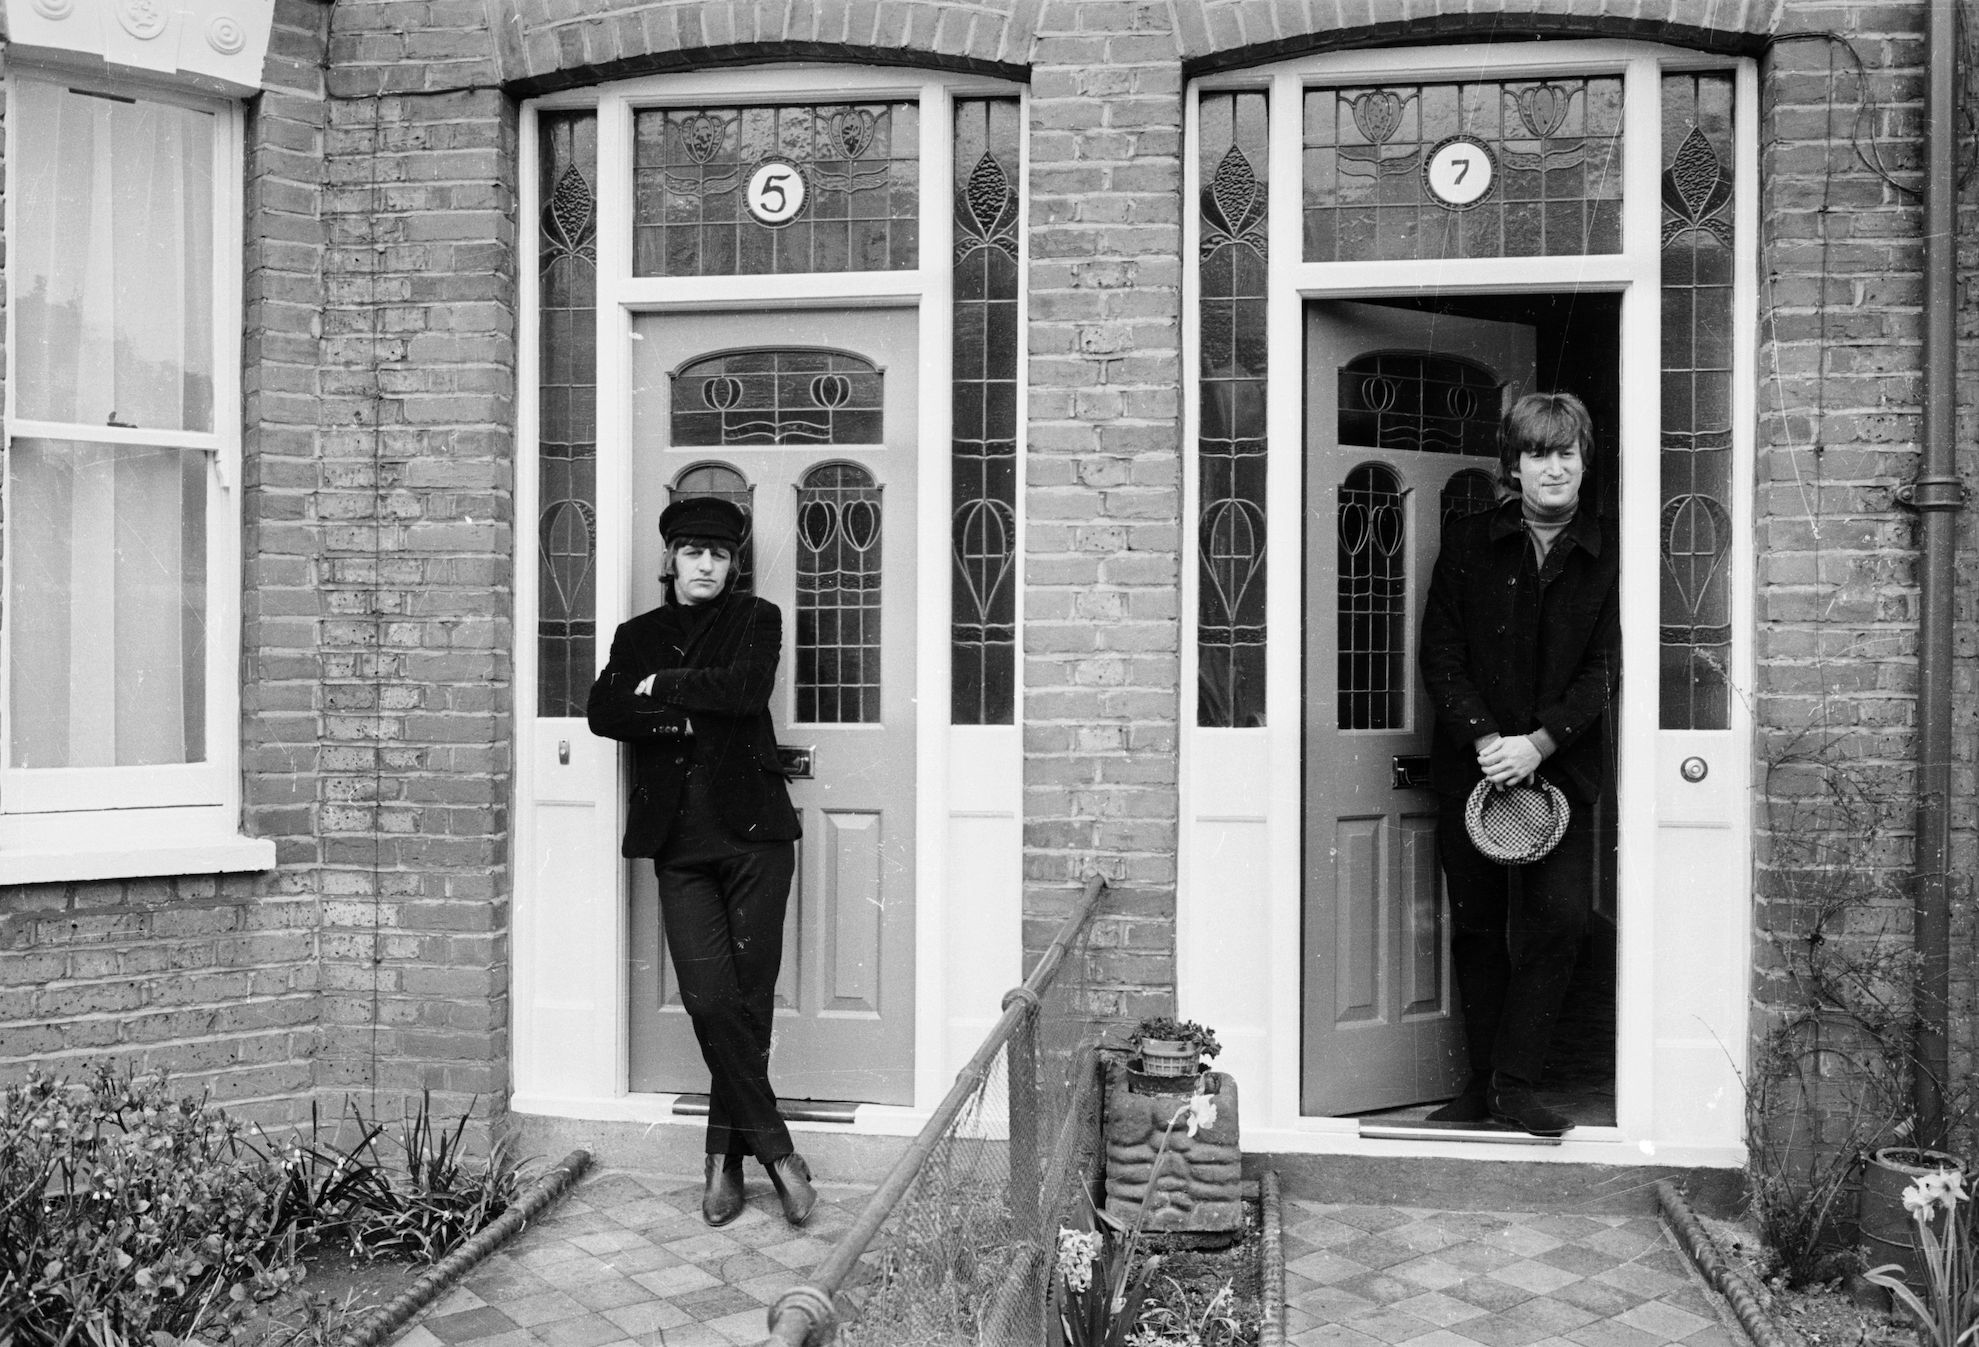 Ringo Starr and John Lennon on location for the filming of 'Help'